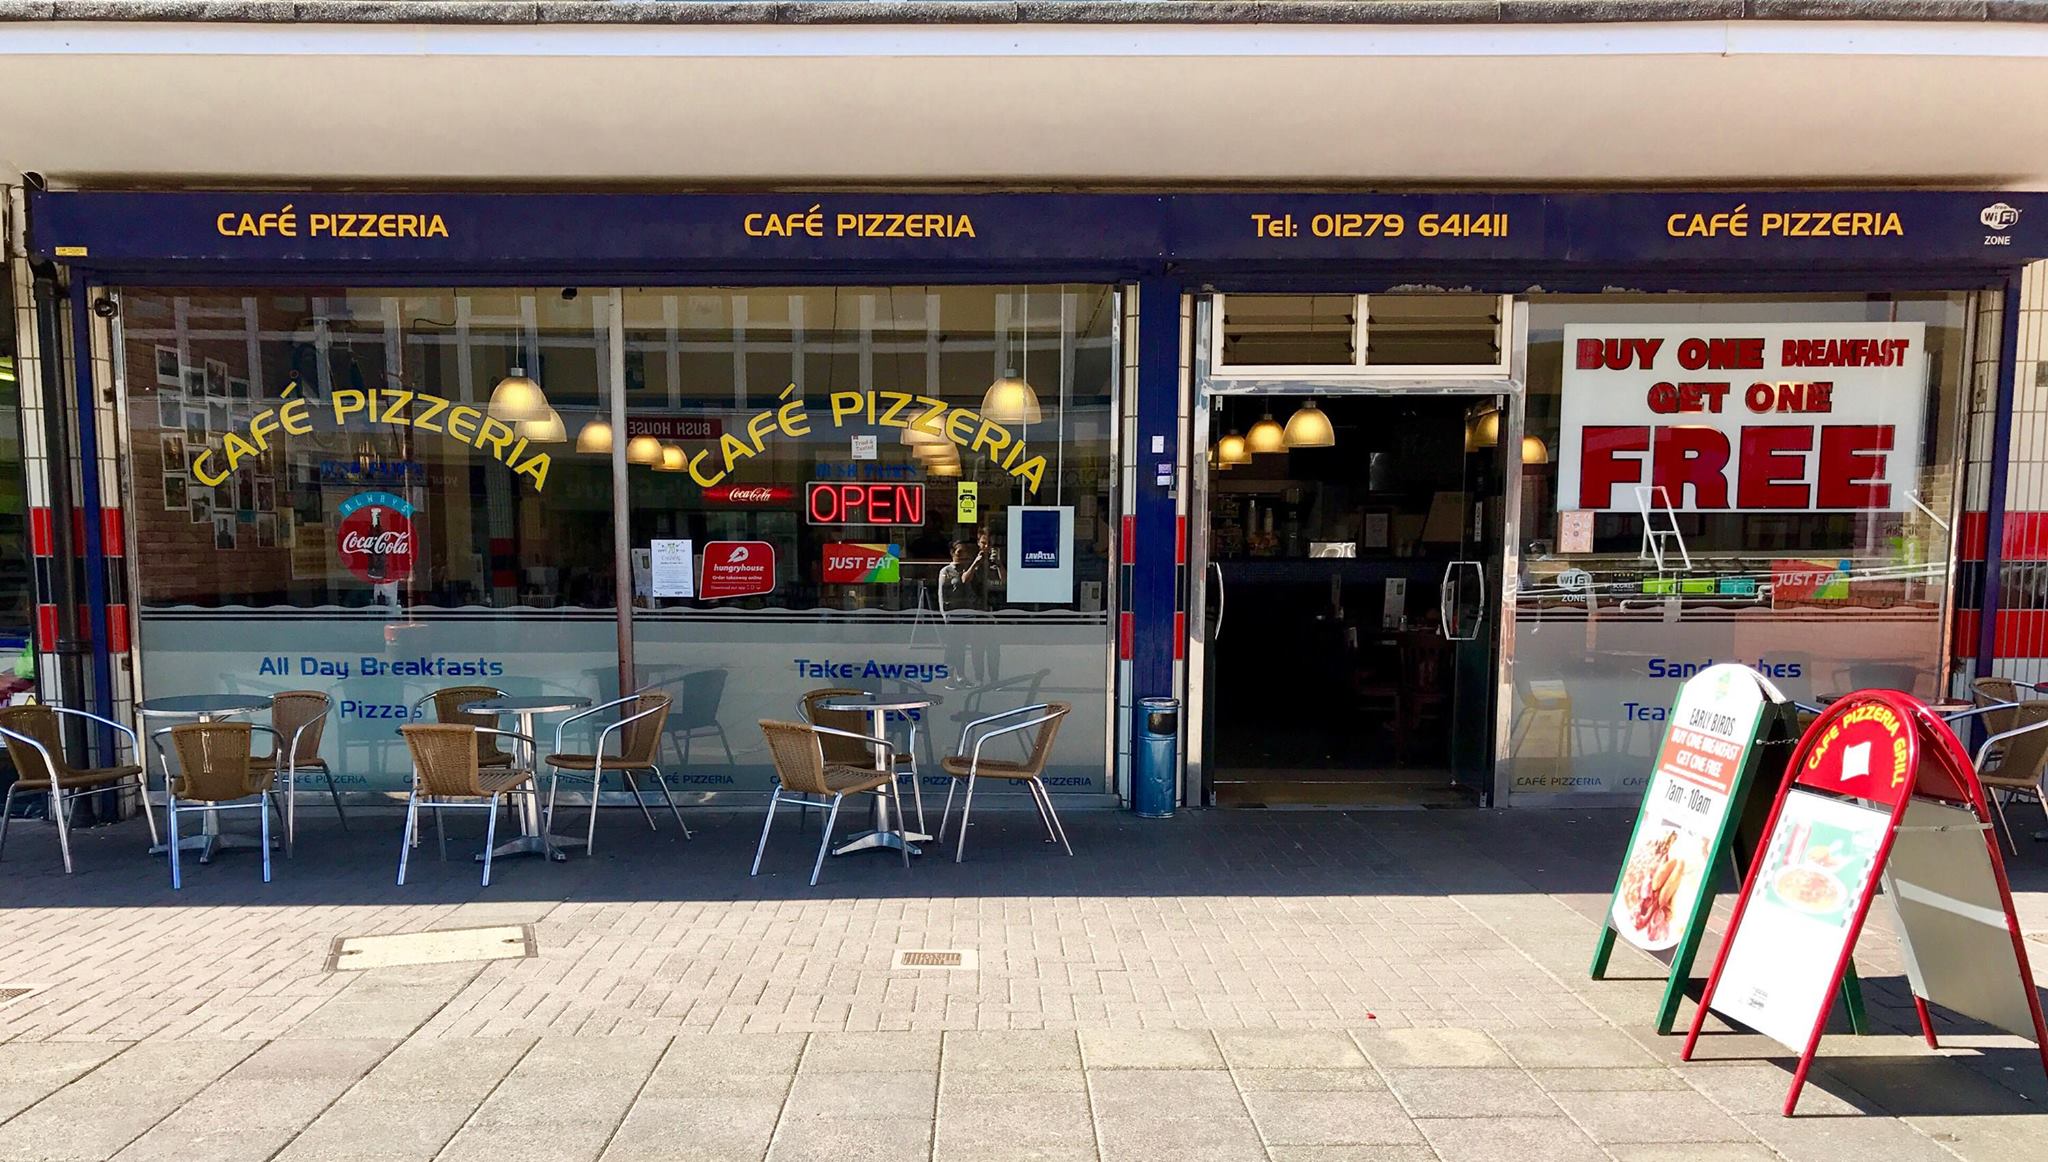 Café Pizzeria (For pizza & kebab delivery call 01279 641 411)